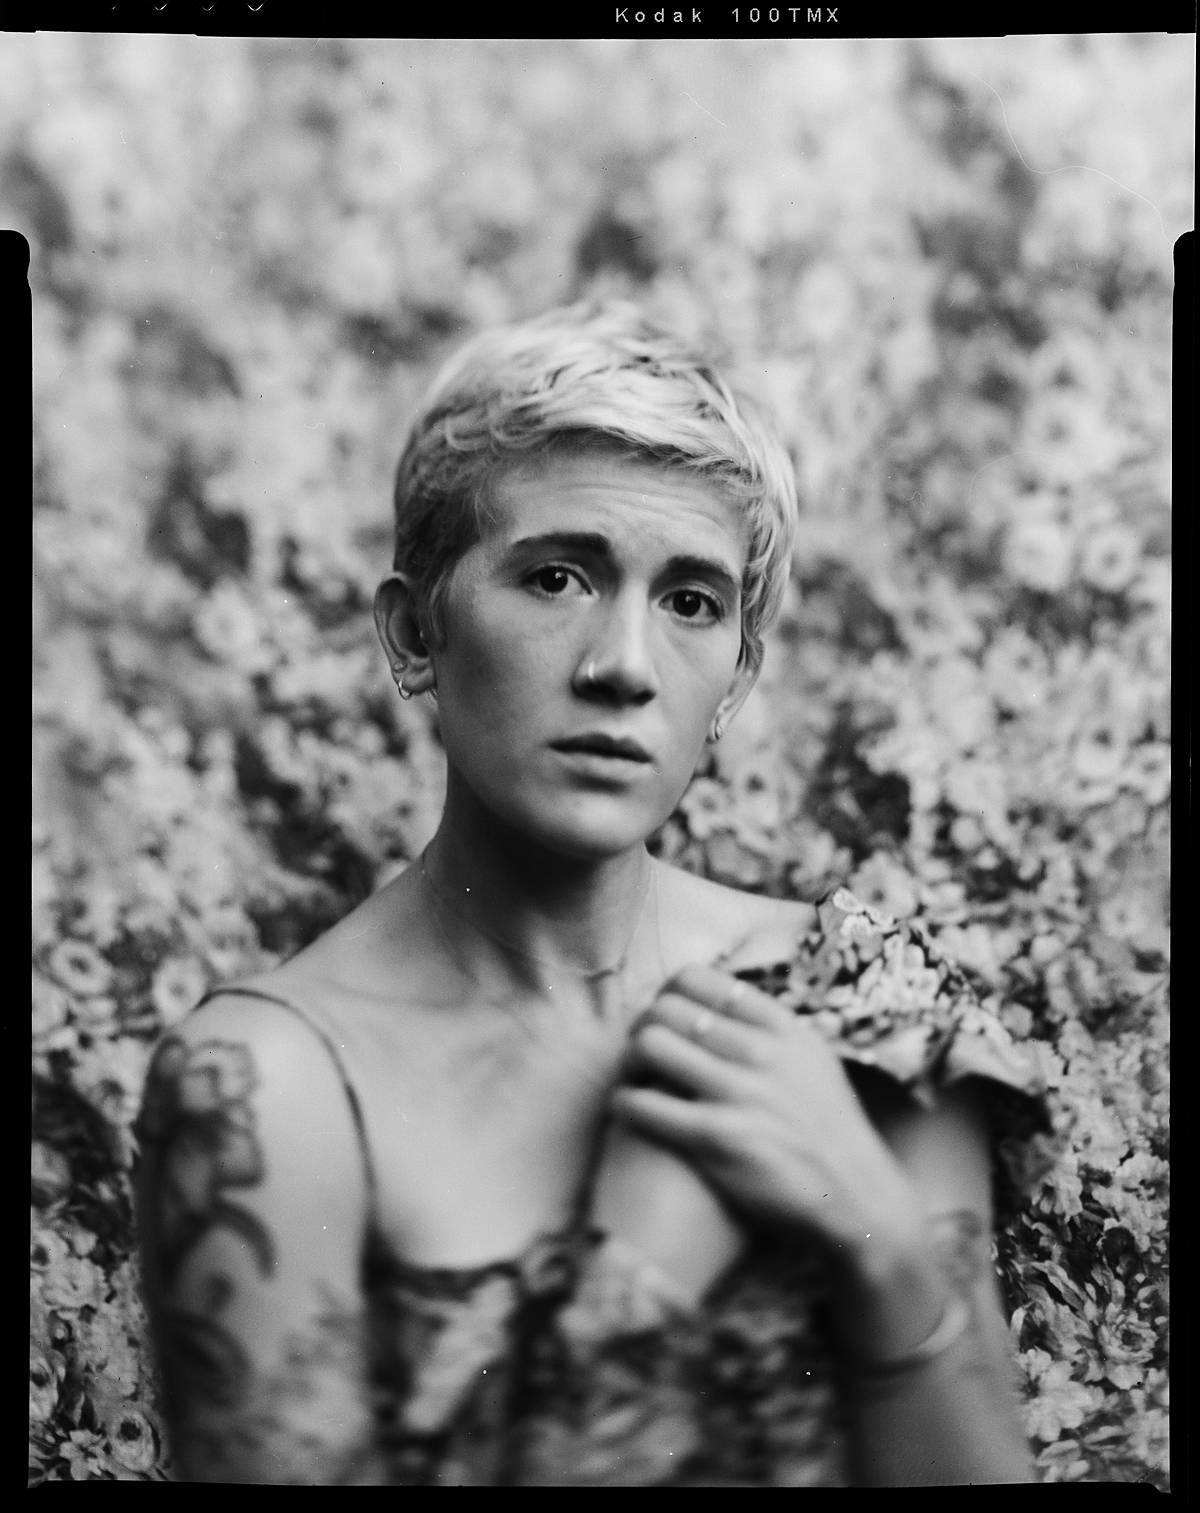 4x5 large format film portrait by brian d smith photography on kodak t-max 100 film and intrepid 4x5 mkiii camera